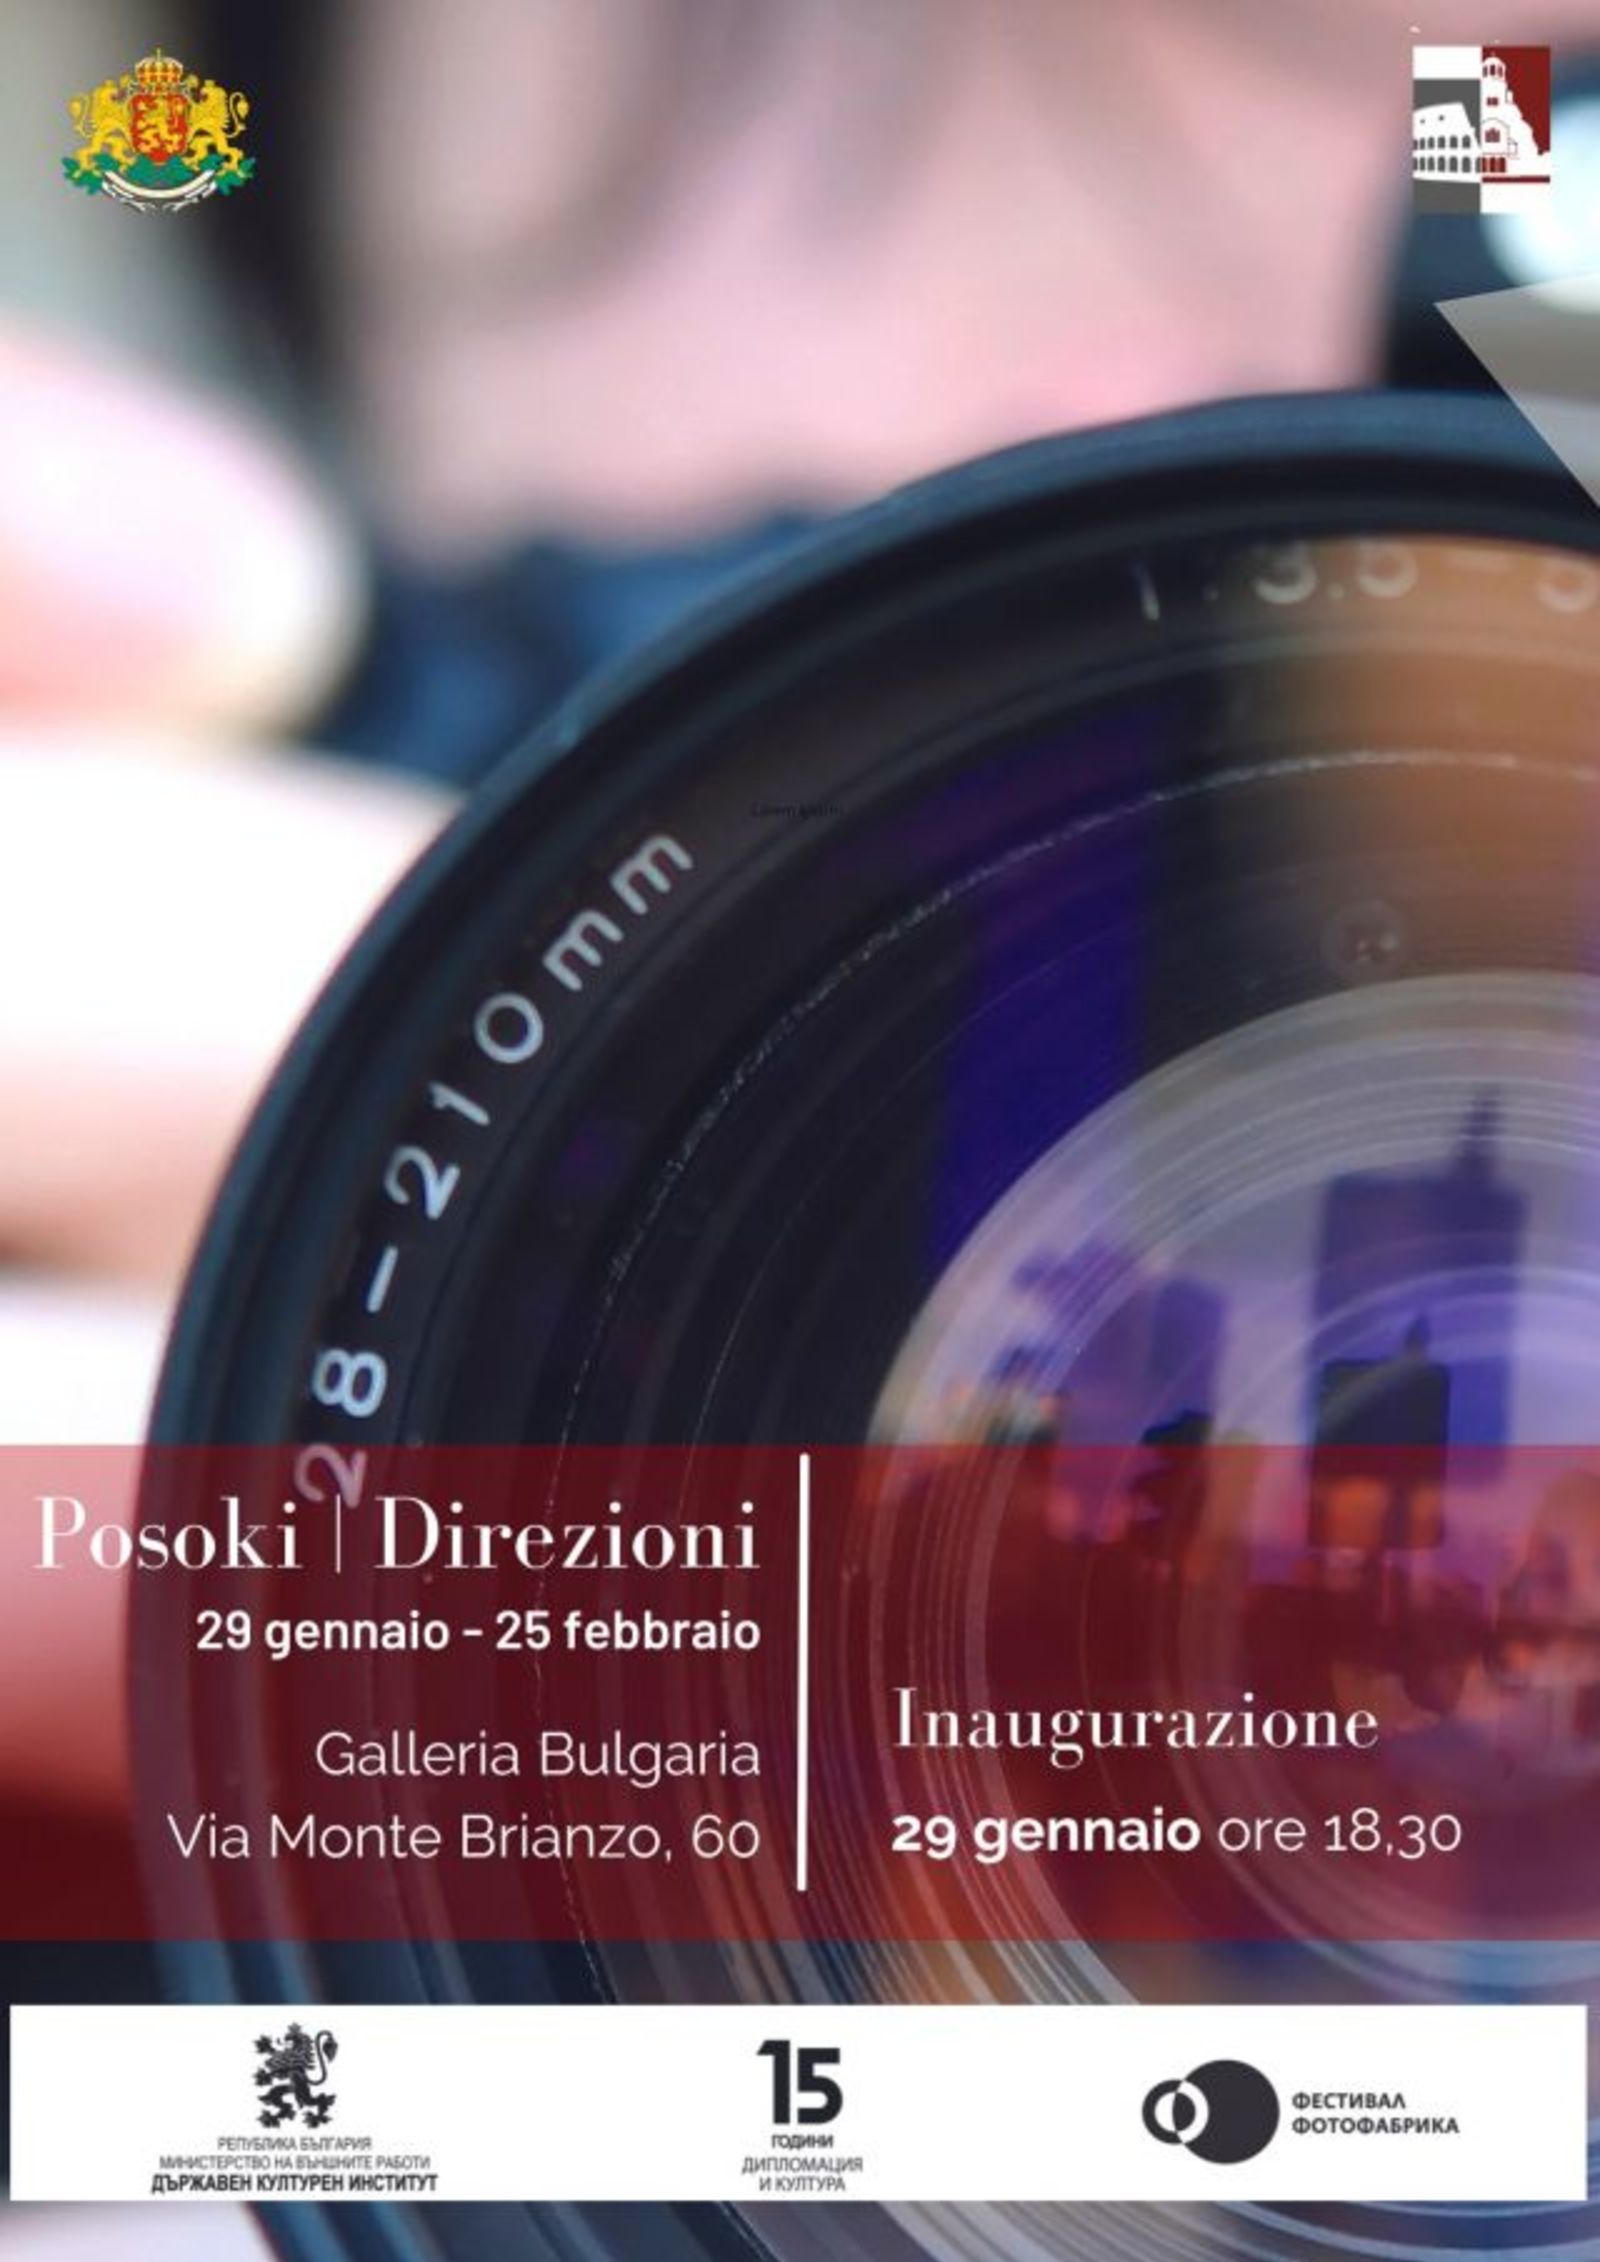 The Photographic Exhibition "Directions" is a Guest at the Bulgarian Cultural Institute in Rome